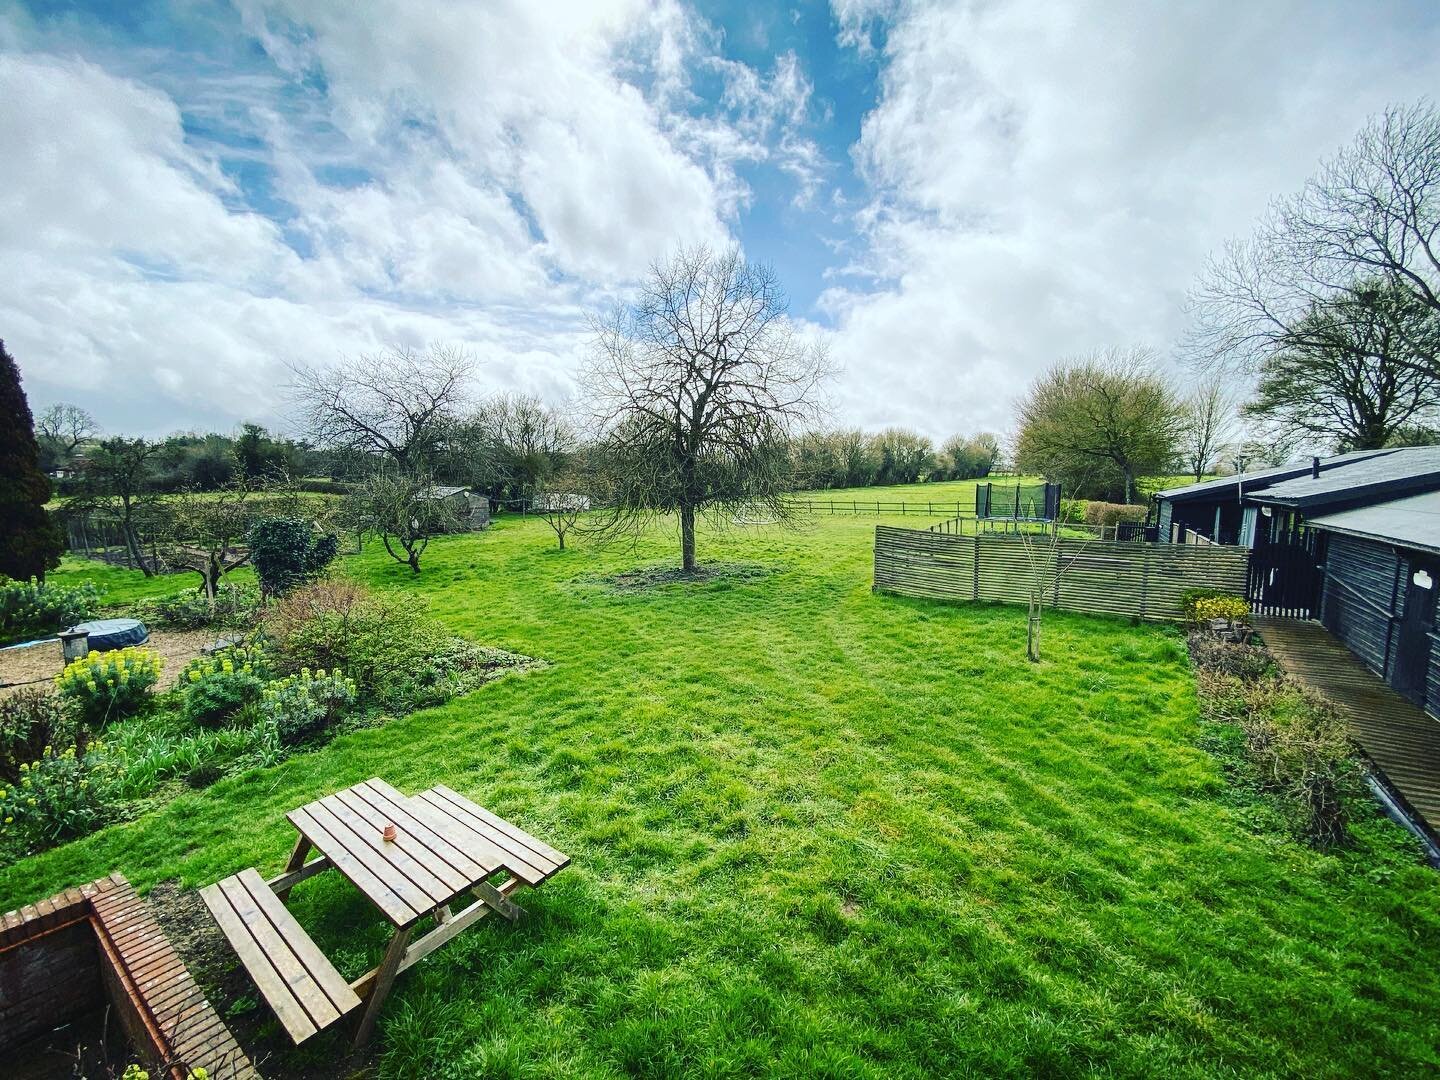 The view from the annexe! It&rsquo;s a rainy day here but the grass is rejoicing in response! 💚

Happy Friday all and we hope you all enjoy the Easter holidays! 🐰

#easter #spring #rain #bnb #airbnb #localbusiness #familybusiness #accommodation #no